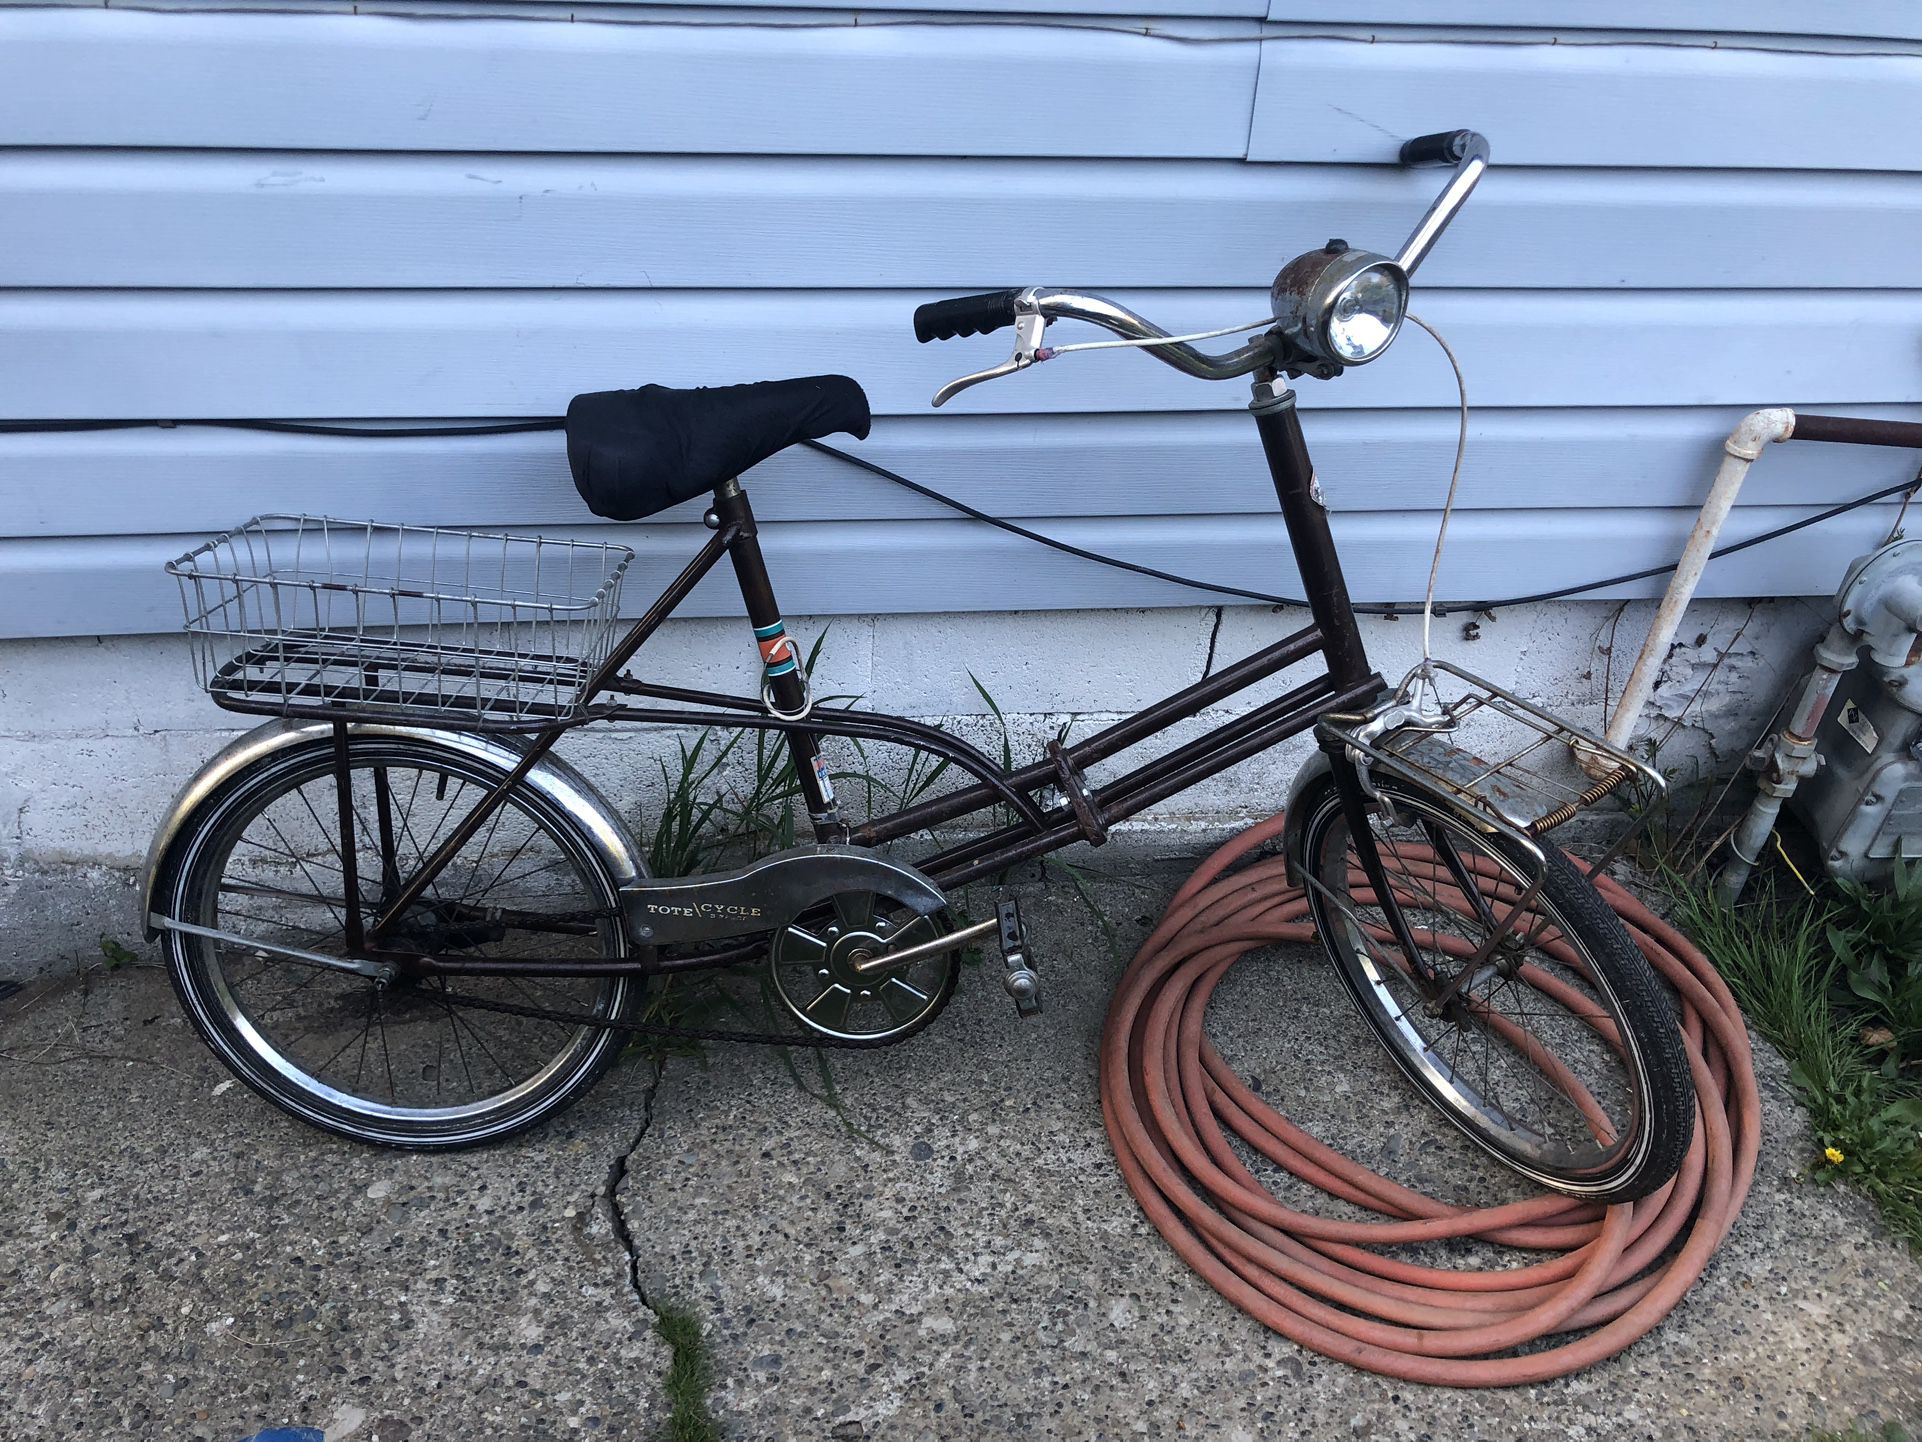 Vintage Sears Tote Cycle Collapsible Bike